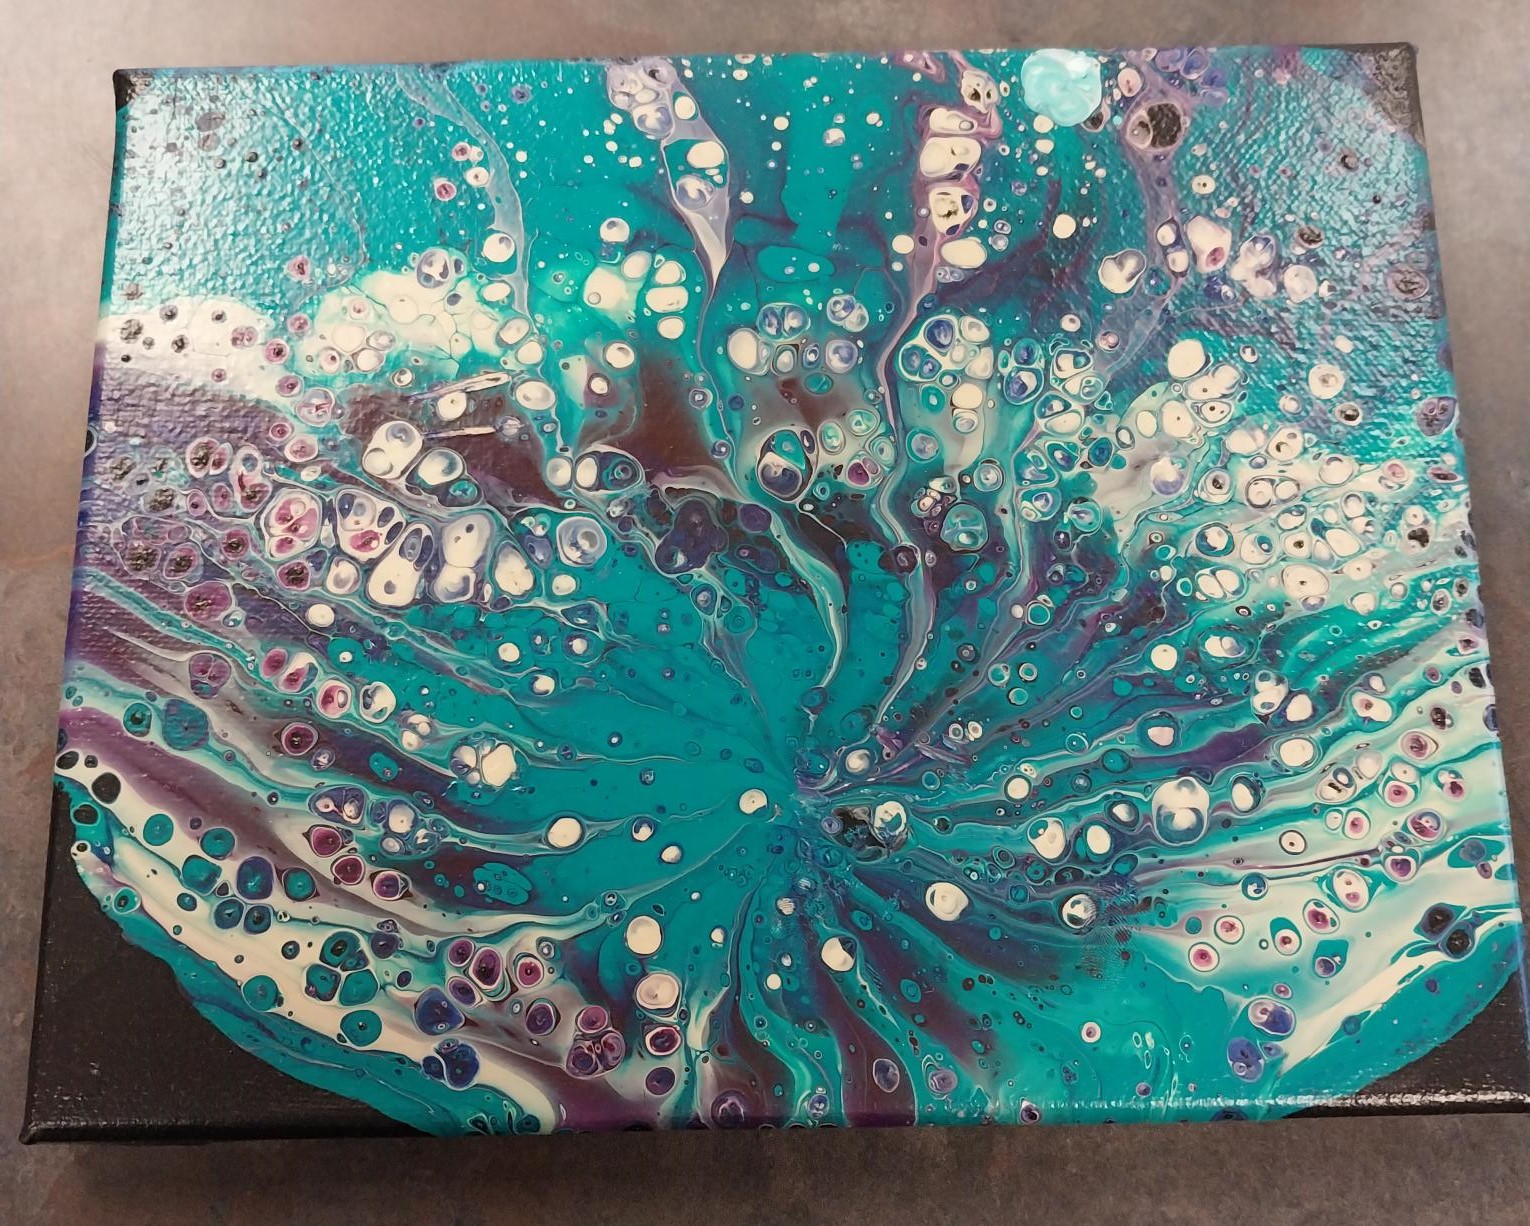 Image of a completed paint pour project.